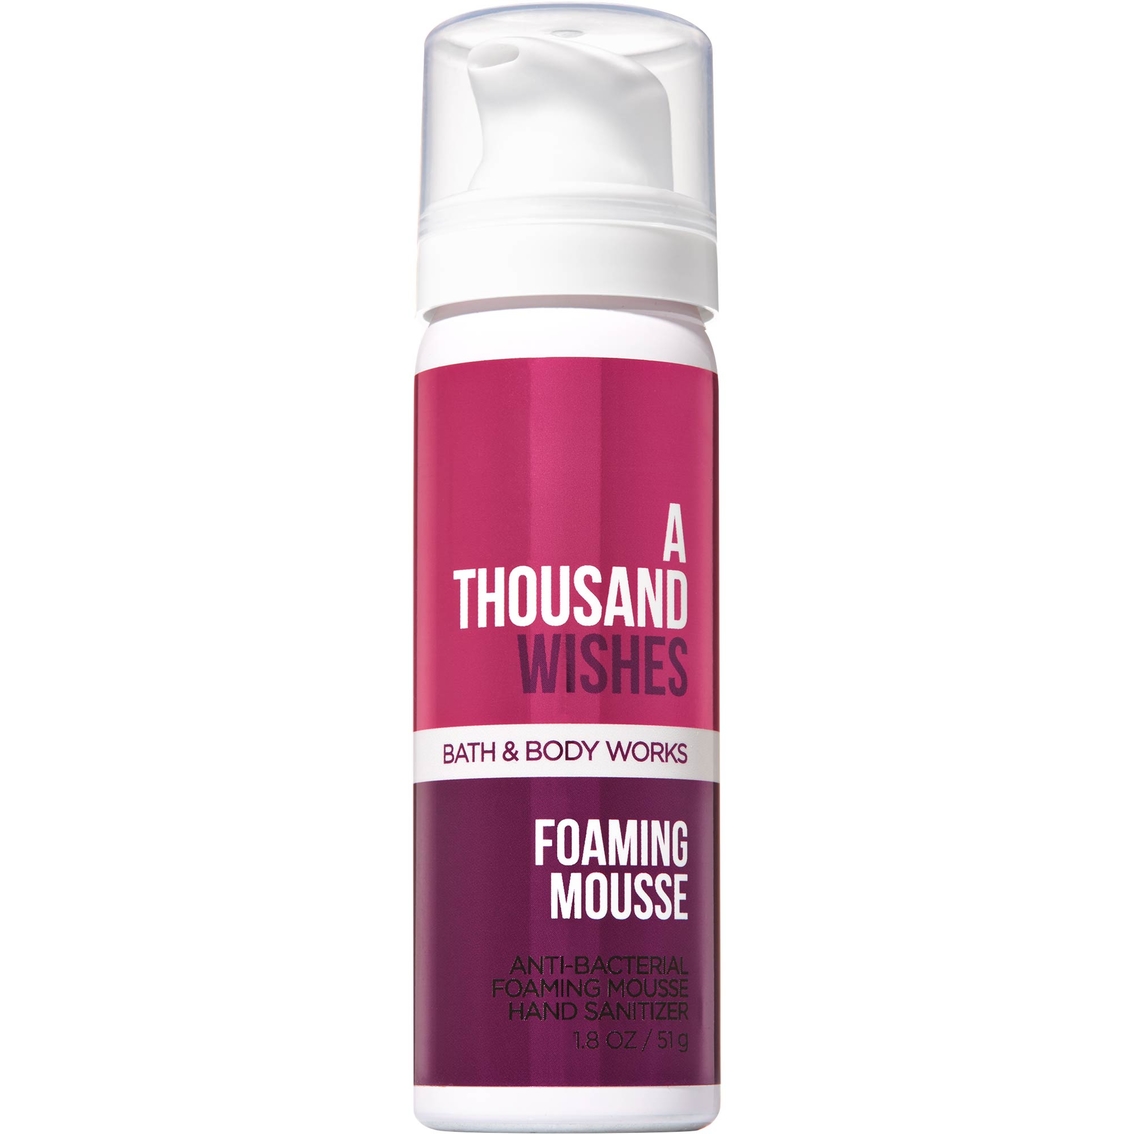 Bath Body Works A Thousand Wishes Foaming Mousse Hand